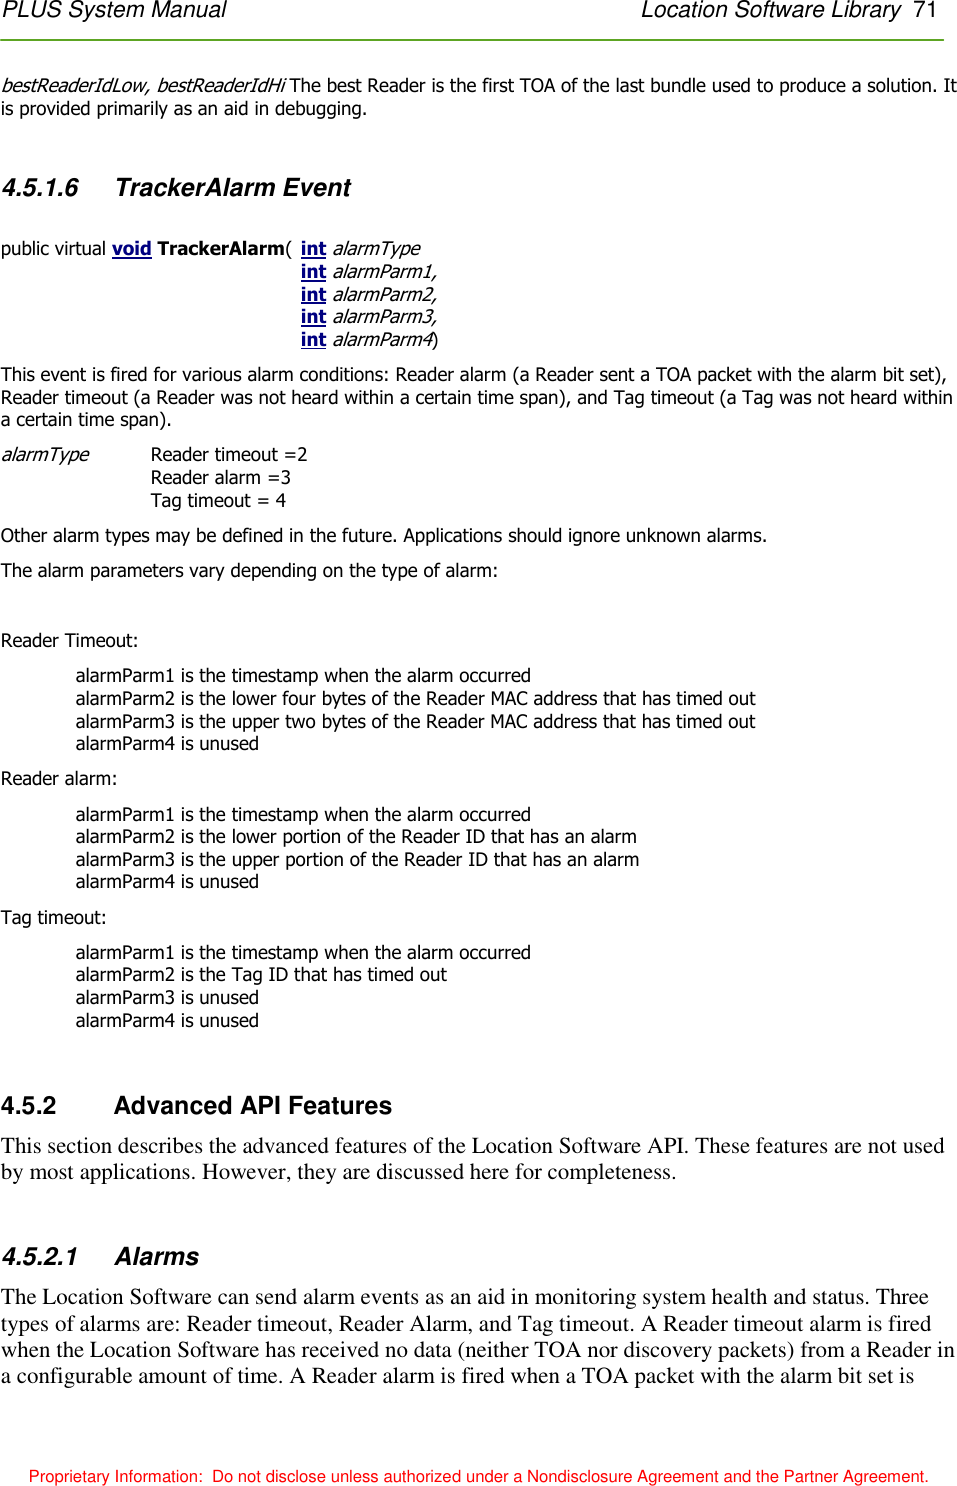 PLUS System Manual    Location Software Library  71 Proprietary Information:  Do not disclose unless authorized under a Nondisclosure Agreement and the Partner Agreement. bestReaderIdLow, bestReaderIdHi The best Reader is the first TOA of the last bundle used to produce a solution. It is provided primarily as an aid in debugging.   4.5.1.6  TrackerAlarm Event  public virtual void TrackerAlarm(  int alarmType  int alarmParm1, int alarmParm2, int alarmParm3, int alarmParm4) This event is fired for various alarm conditions: Reader alarm (a Reader sent a TOA packet with the alarm bit set), Reader timeout (a Reader was not heard within a certain time span), and Tag timeout (a Tag was not heard within a certain time span). alarmType Reader timeout =2 Reader alarm =3 Tag timeout = 4 Other alarm types may be defined in the future. Applications should ignore unknown alarms. The alarm parameters vary depending on the type of alarm:  Reader Timeout: alarmParm1 is the timestamp when the alarm occurred alarmParm2 is the lower four bytes of the Reader MAC address that has timed out alarmParm3 is the upper two bytes of the Reader MAC address that has timed out alarmParm4 is unused Reader alarm: alarmParm1 is the timestamp when the alarm occurred alarmParm2 is the lower portion of the Reader ID that has an alarm alarmParm3 is the upper portion of the Reader ID that has an alarm alarmParm4 is unused Tag timeout: alarmParm1 is the timestamp when the alarm occurred alarmParm2 is the Tag ID that has timed out alarmParm3 is unused alarmParm4 is unused  4.5.2    Advanced API Features This section describes the advanced features of the Location Software API. These features are not used by most applications. However, they are discussed here for completeness.  4.5.2.1  Alarms The Location Software can send alarm events as an aid in monitoring system health and status. Three types of alarms are: Reader timeout, Reader Alarm, and Tag timeout. A Reader timeout alarm is fired when the Location Software has received no data (neither TOA nor discovery packets) from a Reader in a configurable amount of time. A Reader alarm is fired when a TOA packet with the alarm bit set is 